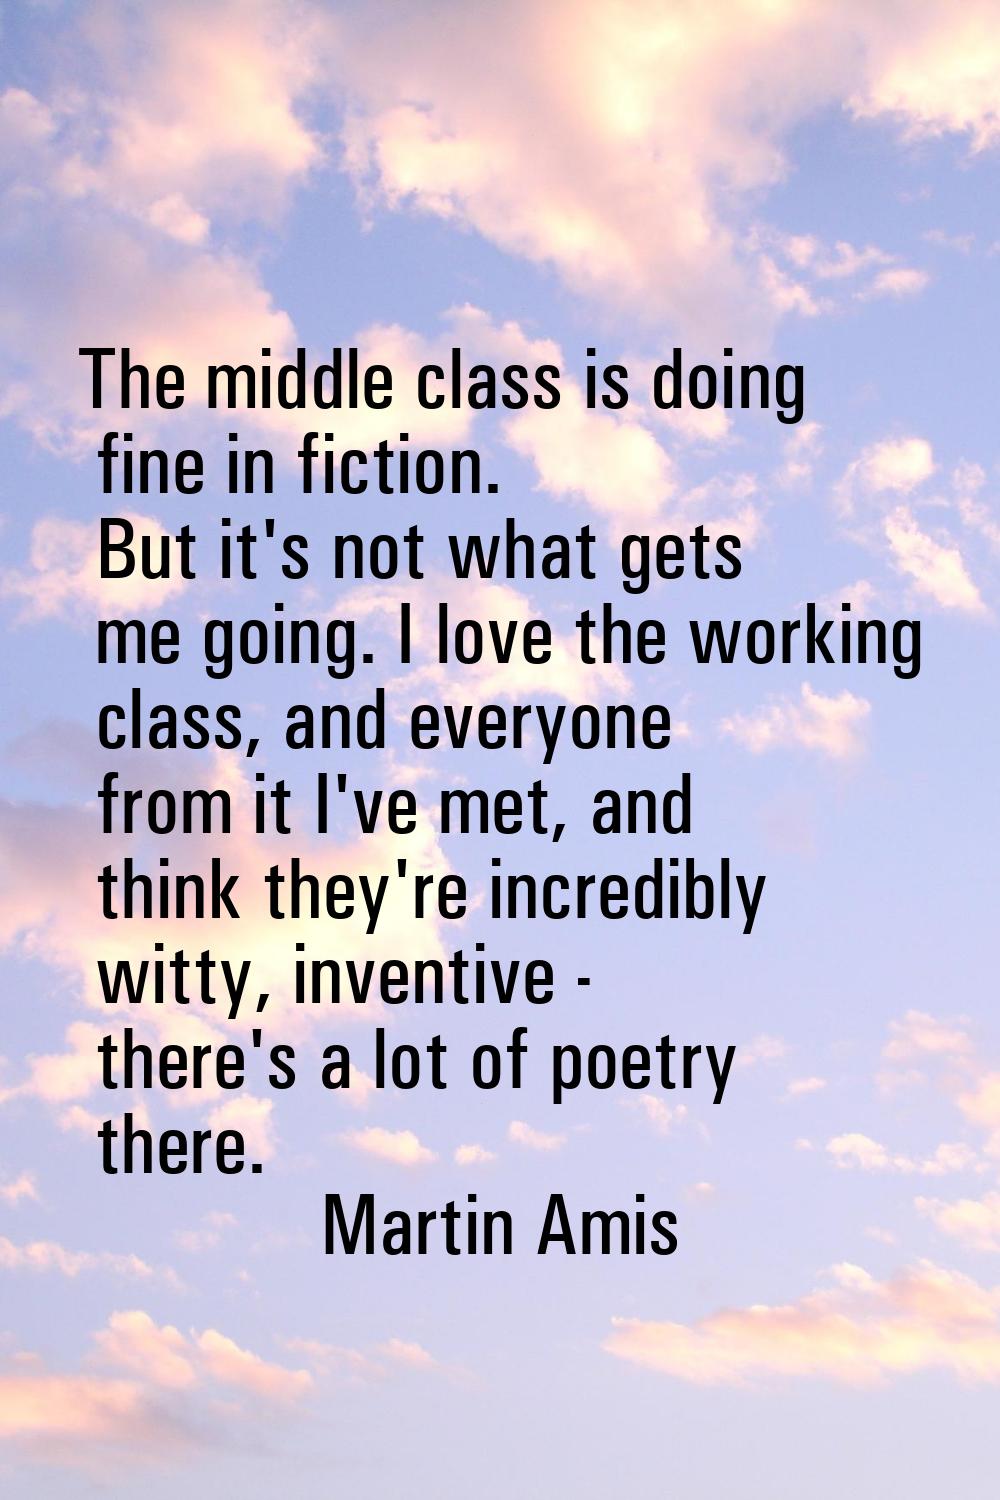 The middle class is doing fine in fiction. But it's not what gets me going. I love the working clas